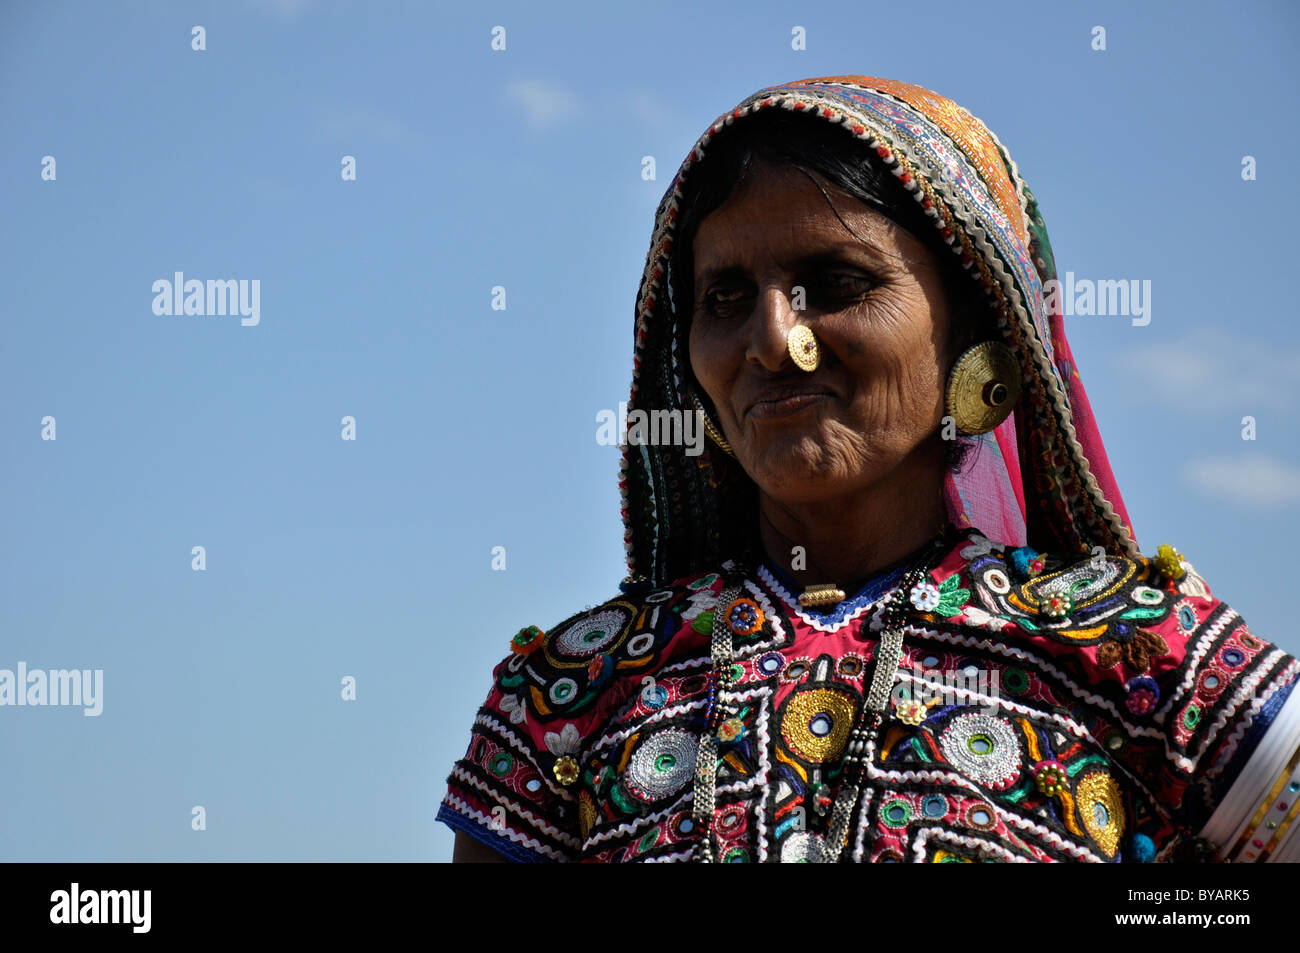 A meghwal woman from Kutch district of Gujarat, wearing traditional ornaments Stock Photo